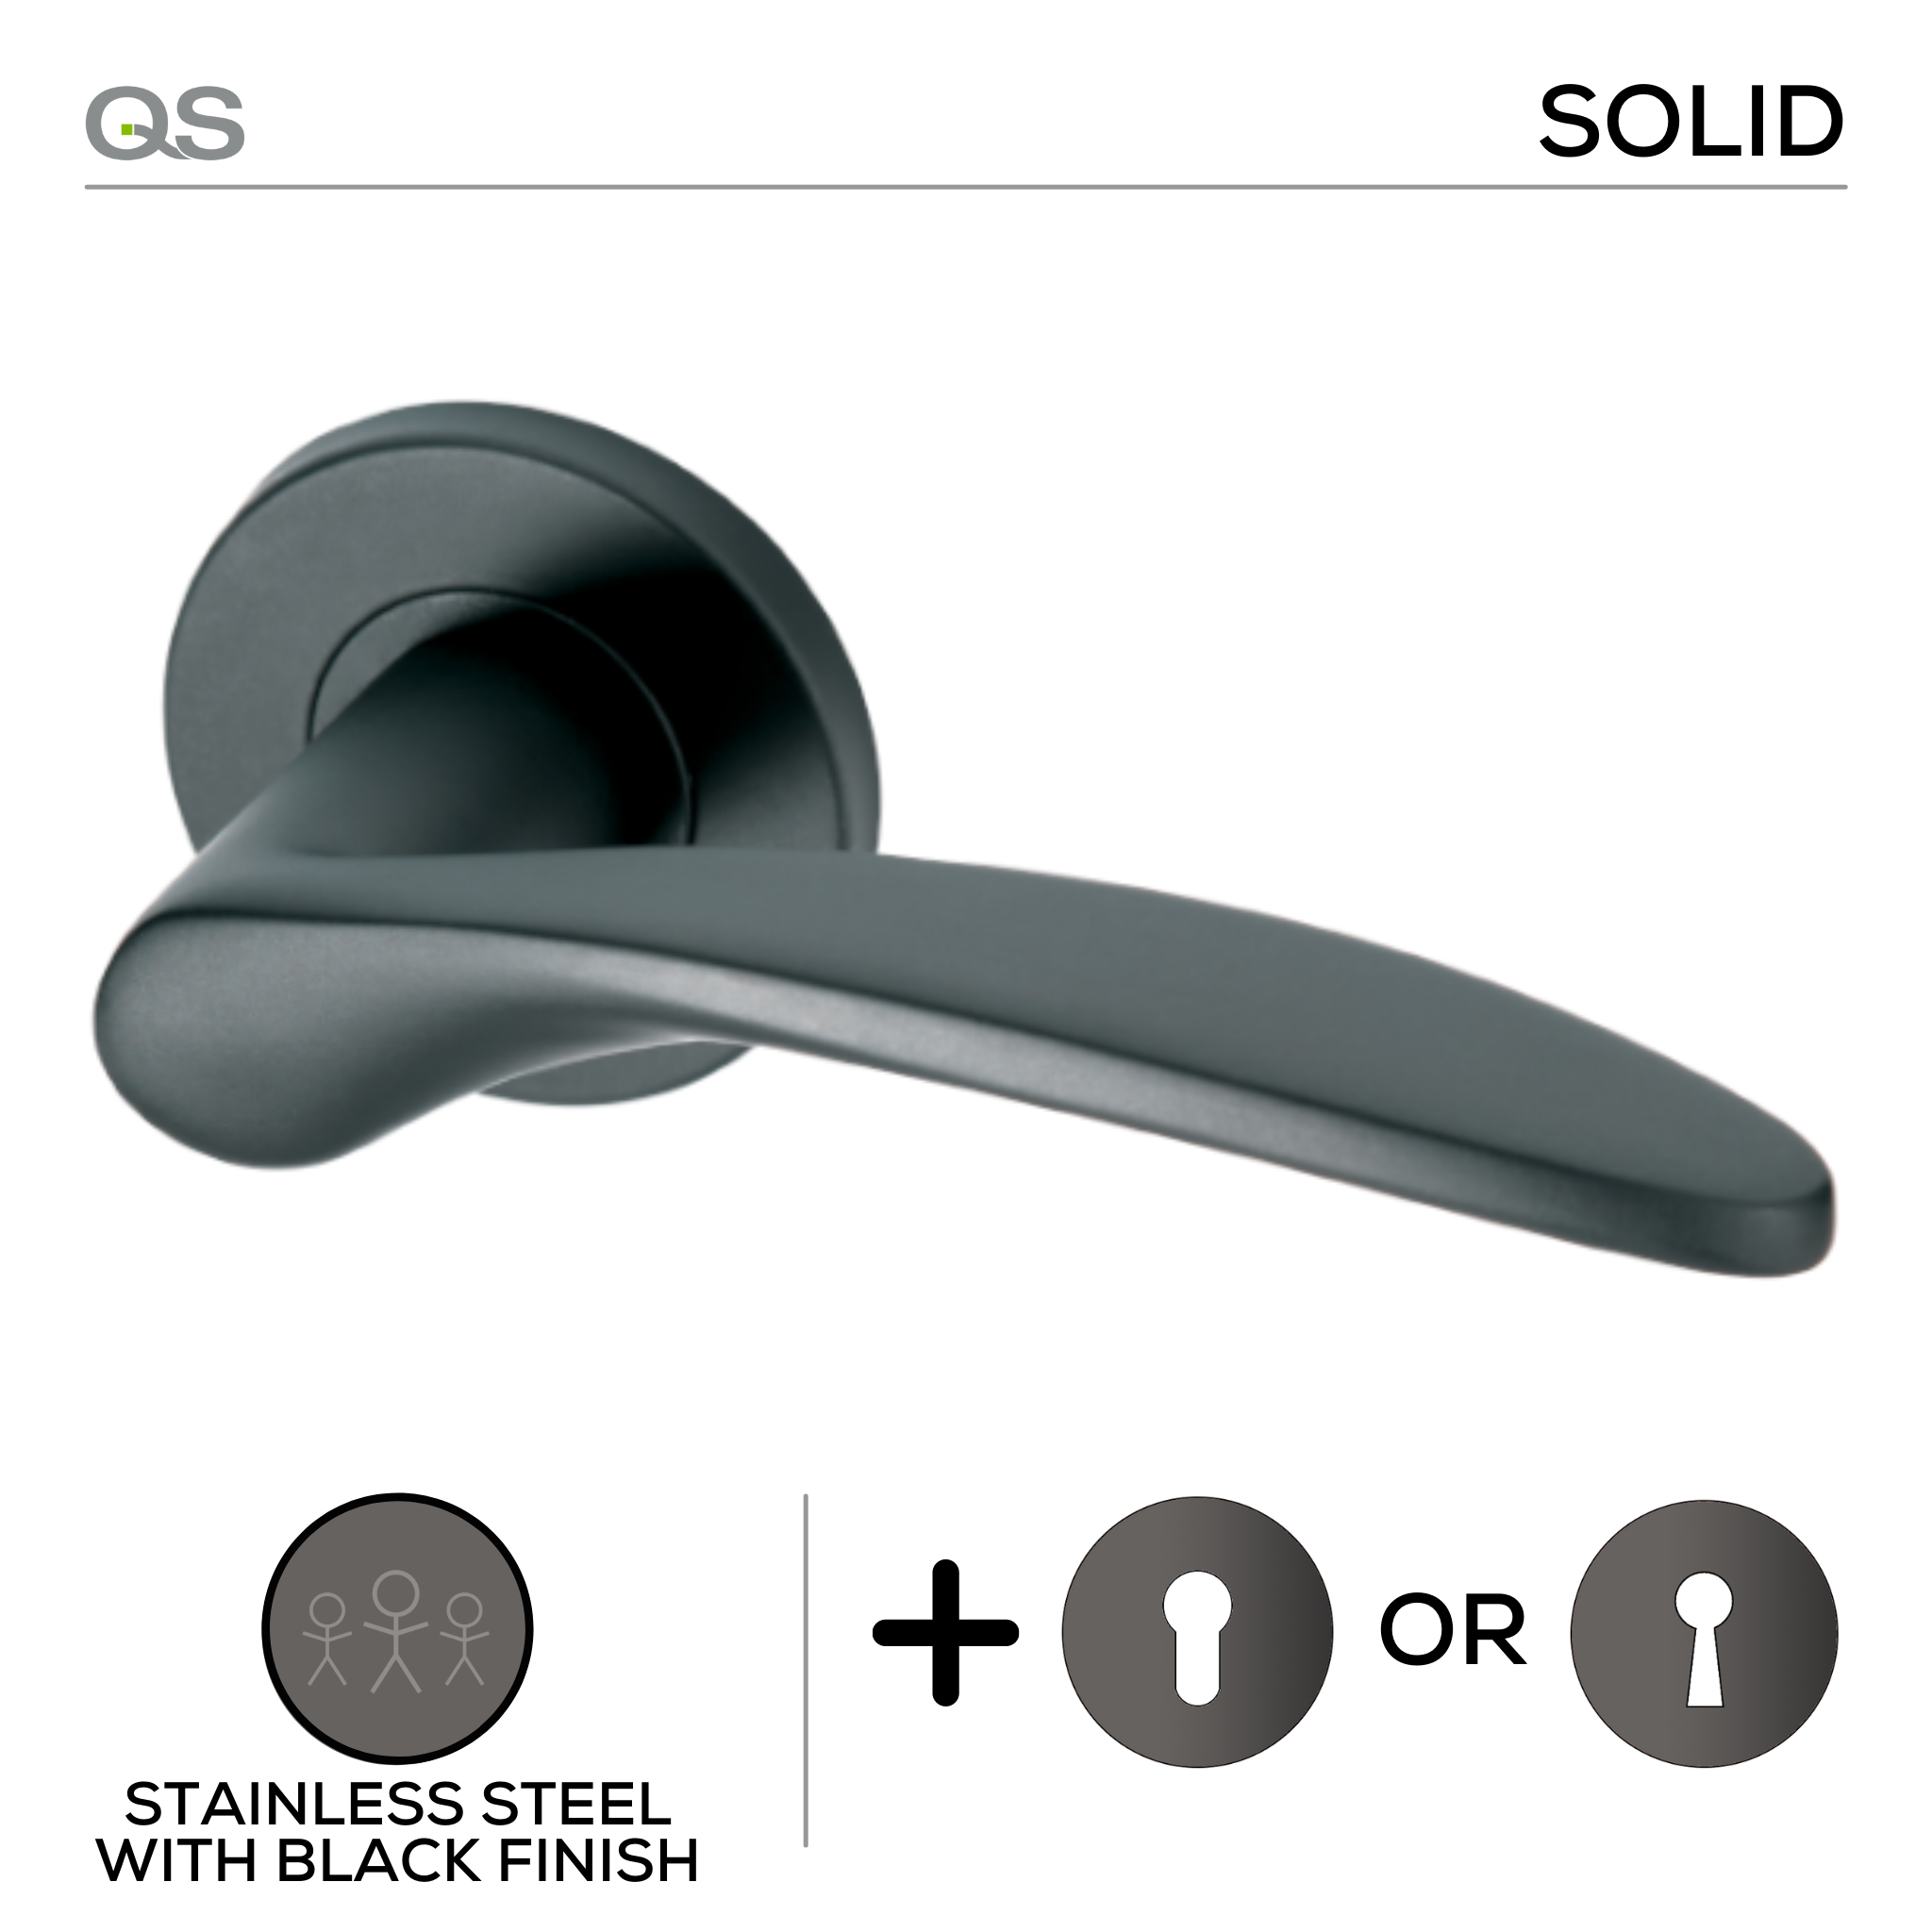 Molo Black, Lever Handle, Mork Range Solid, On Round Rose, With Escutcheons, Black Stainless Steel, QS